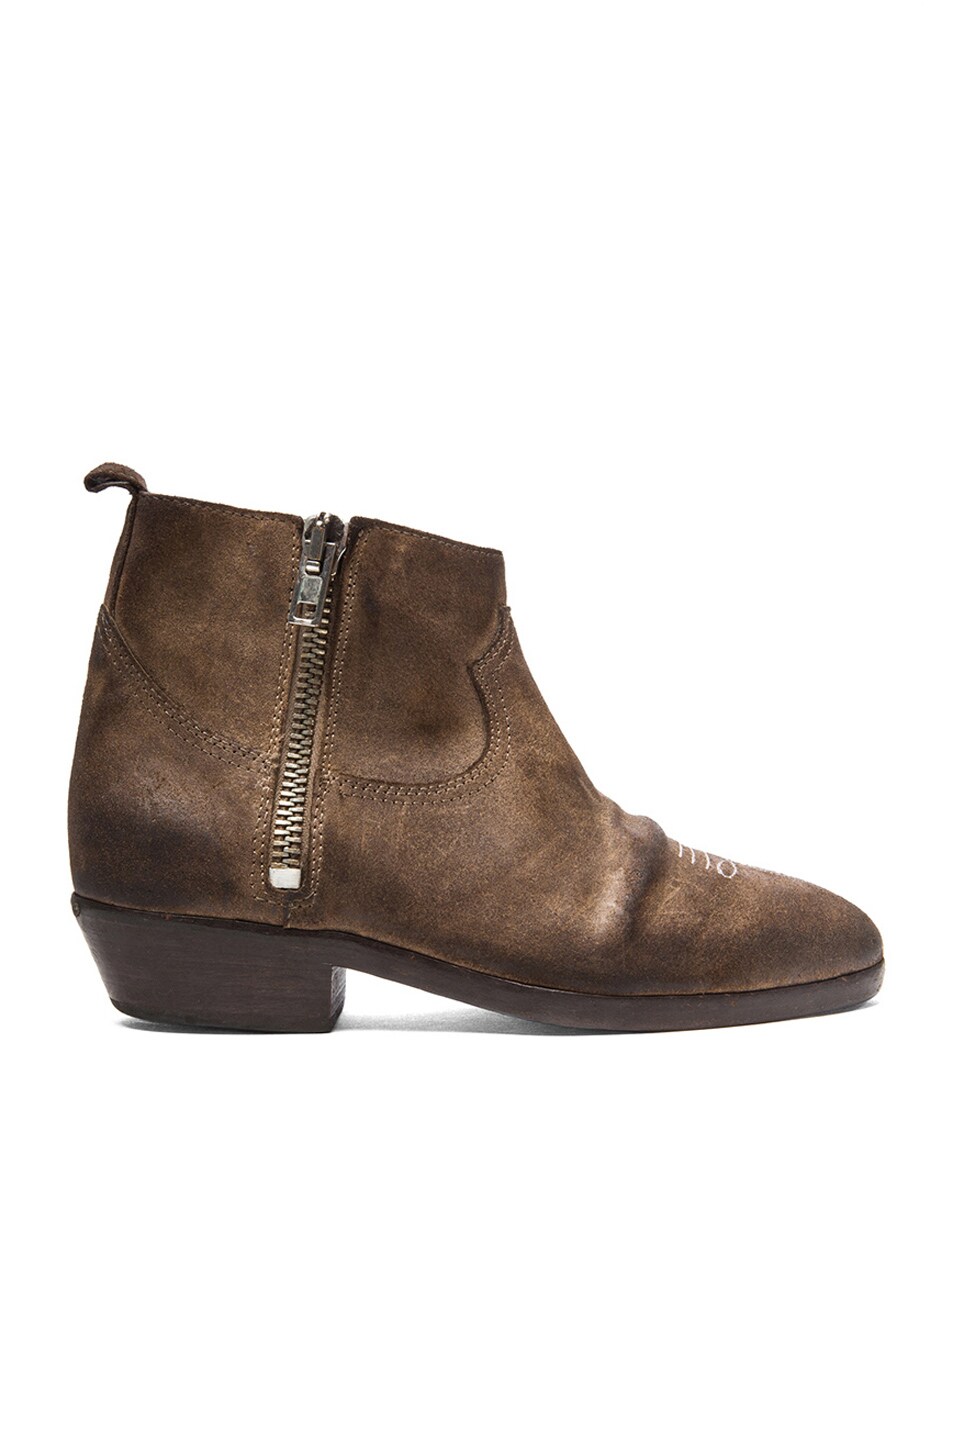 Image 1 of Golden Goose Viamole Suede Boots in Washed Brown